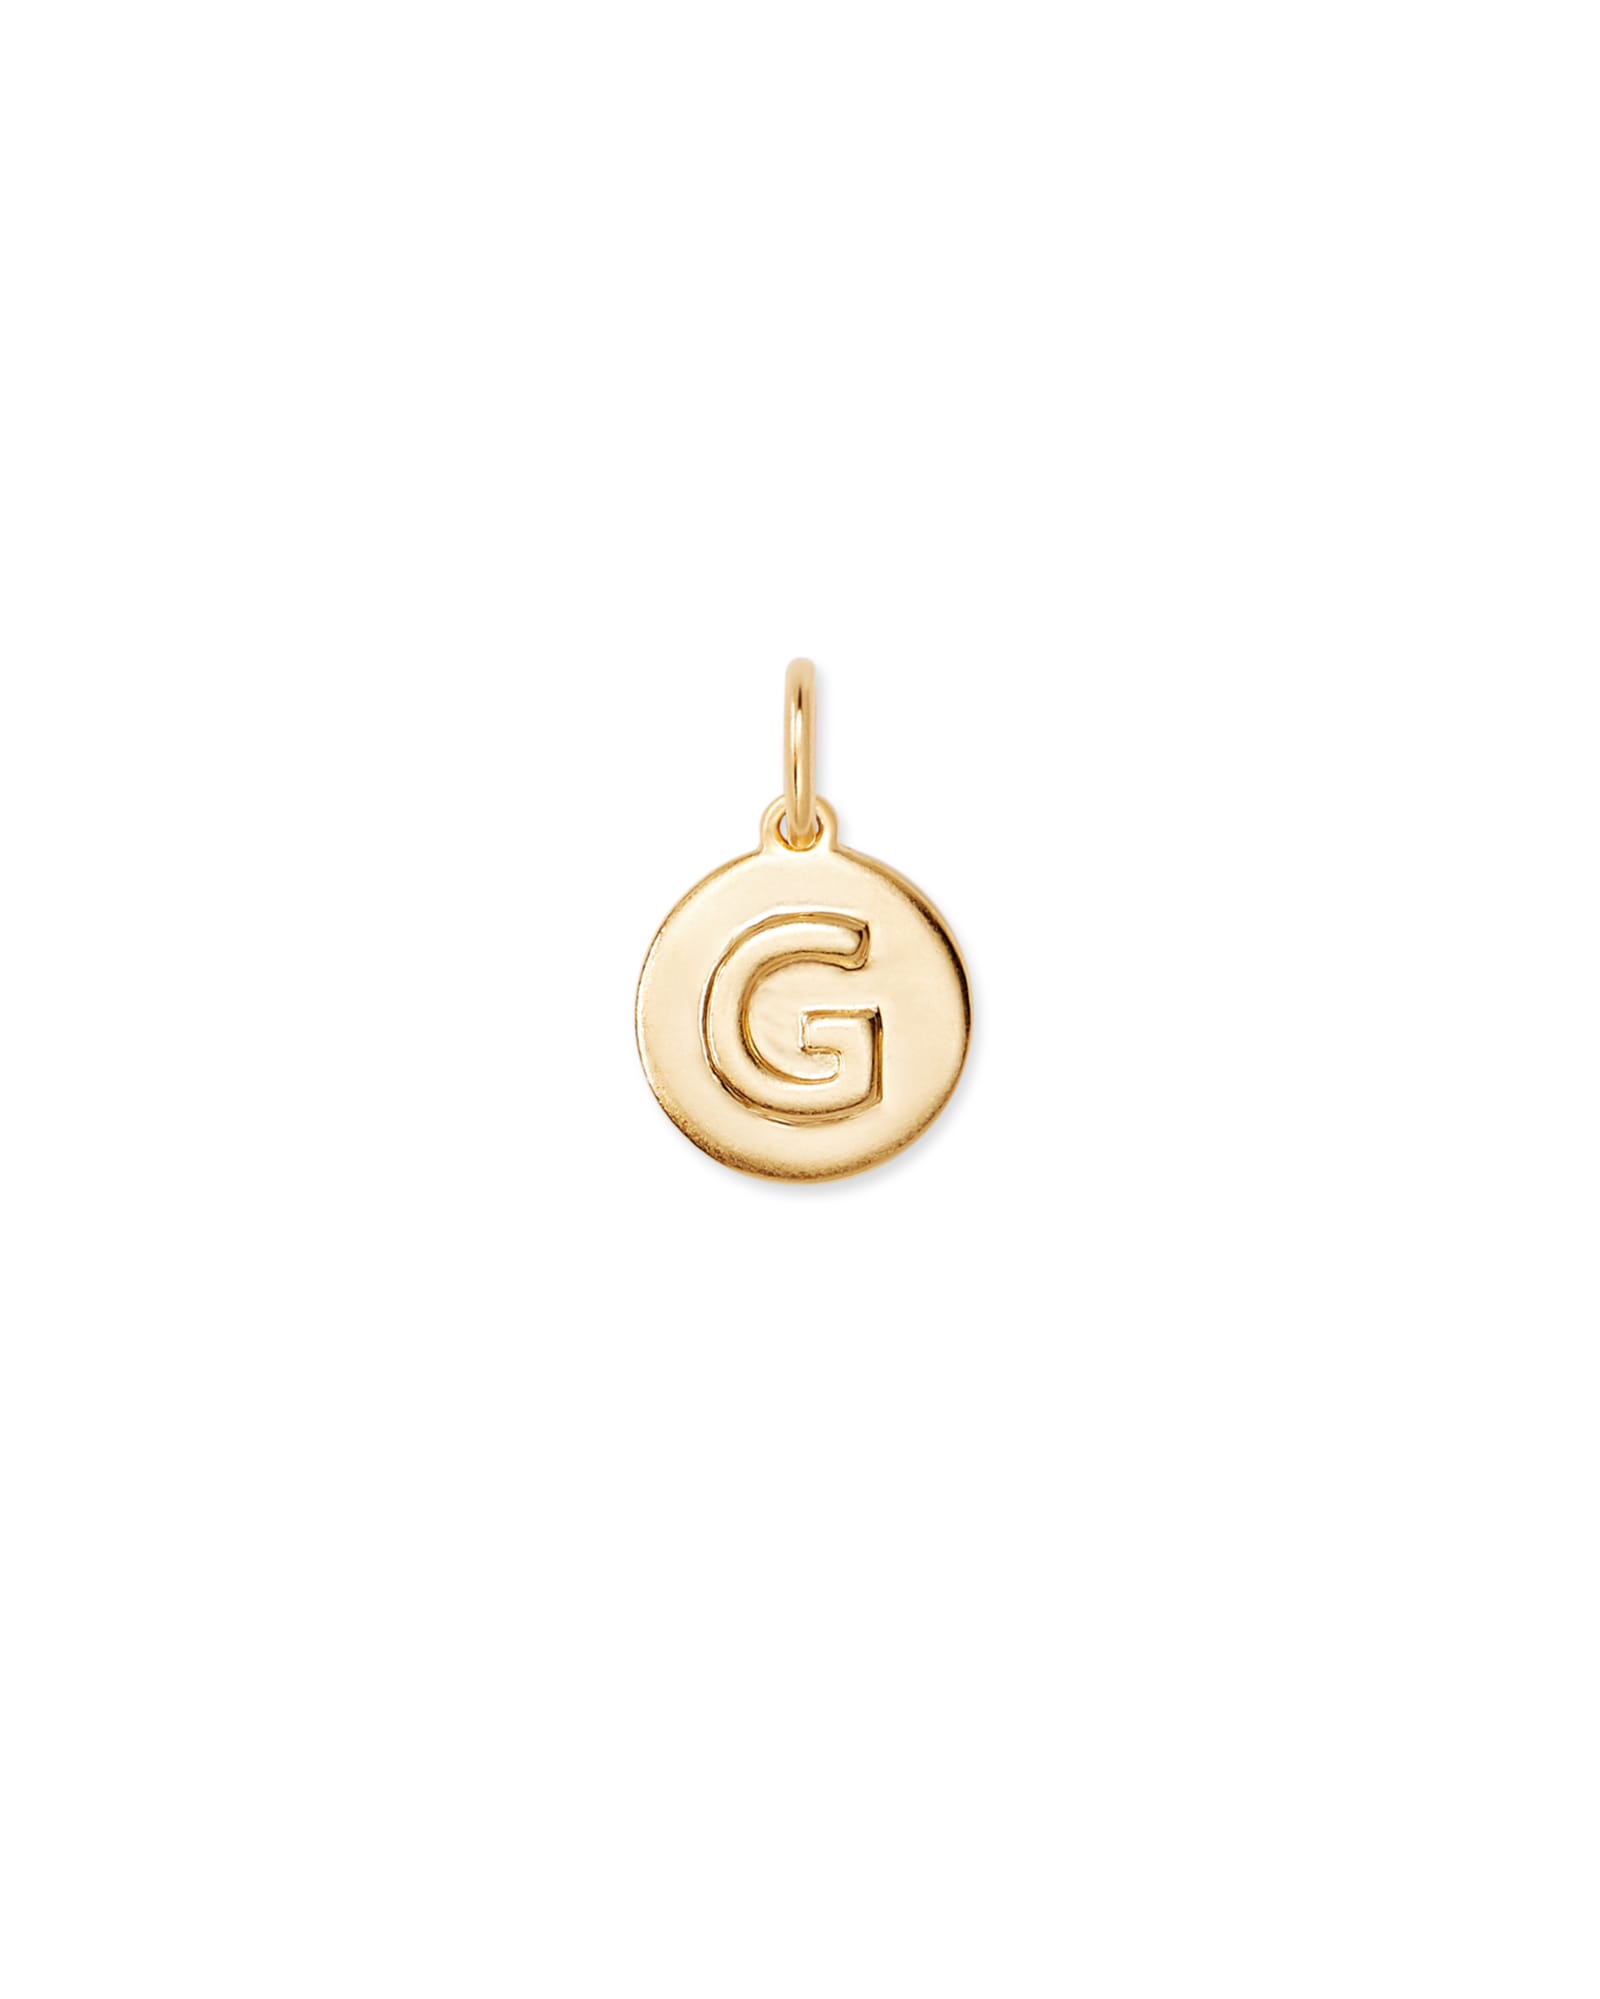 Kendra Scott Letter G Coin Charm in 18k Gold Vermeil | Sterling Silver